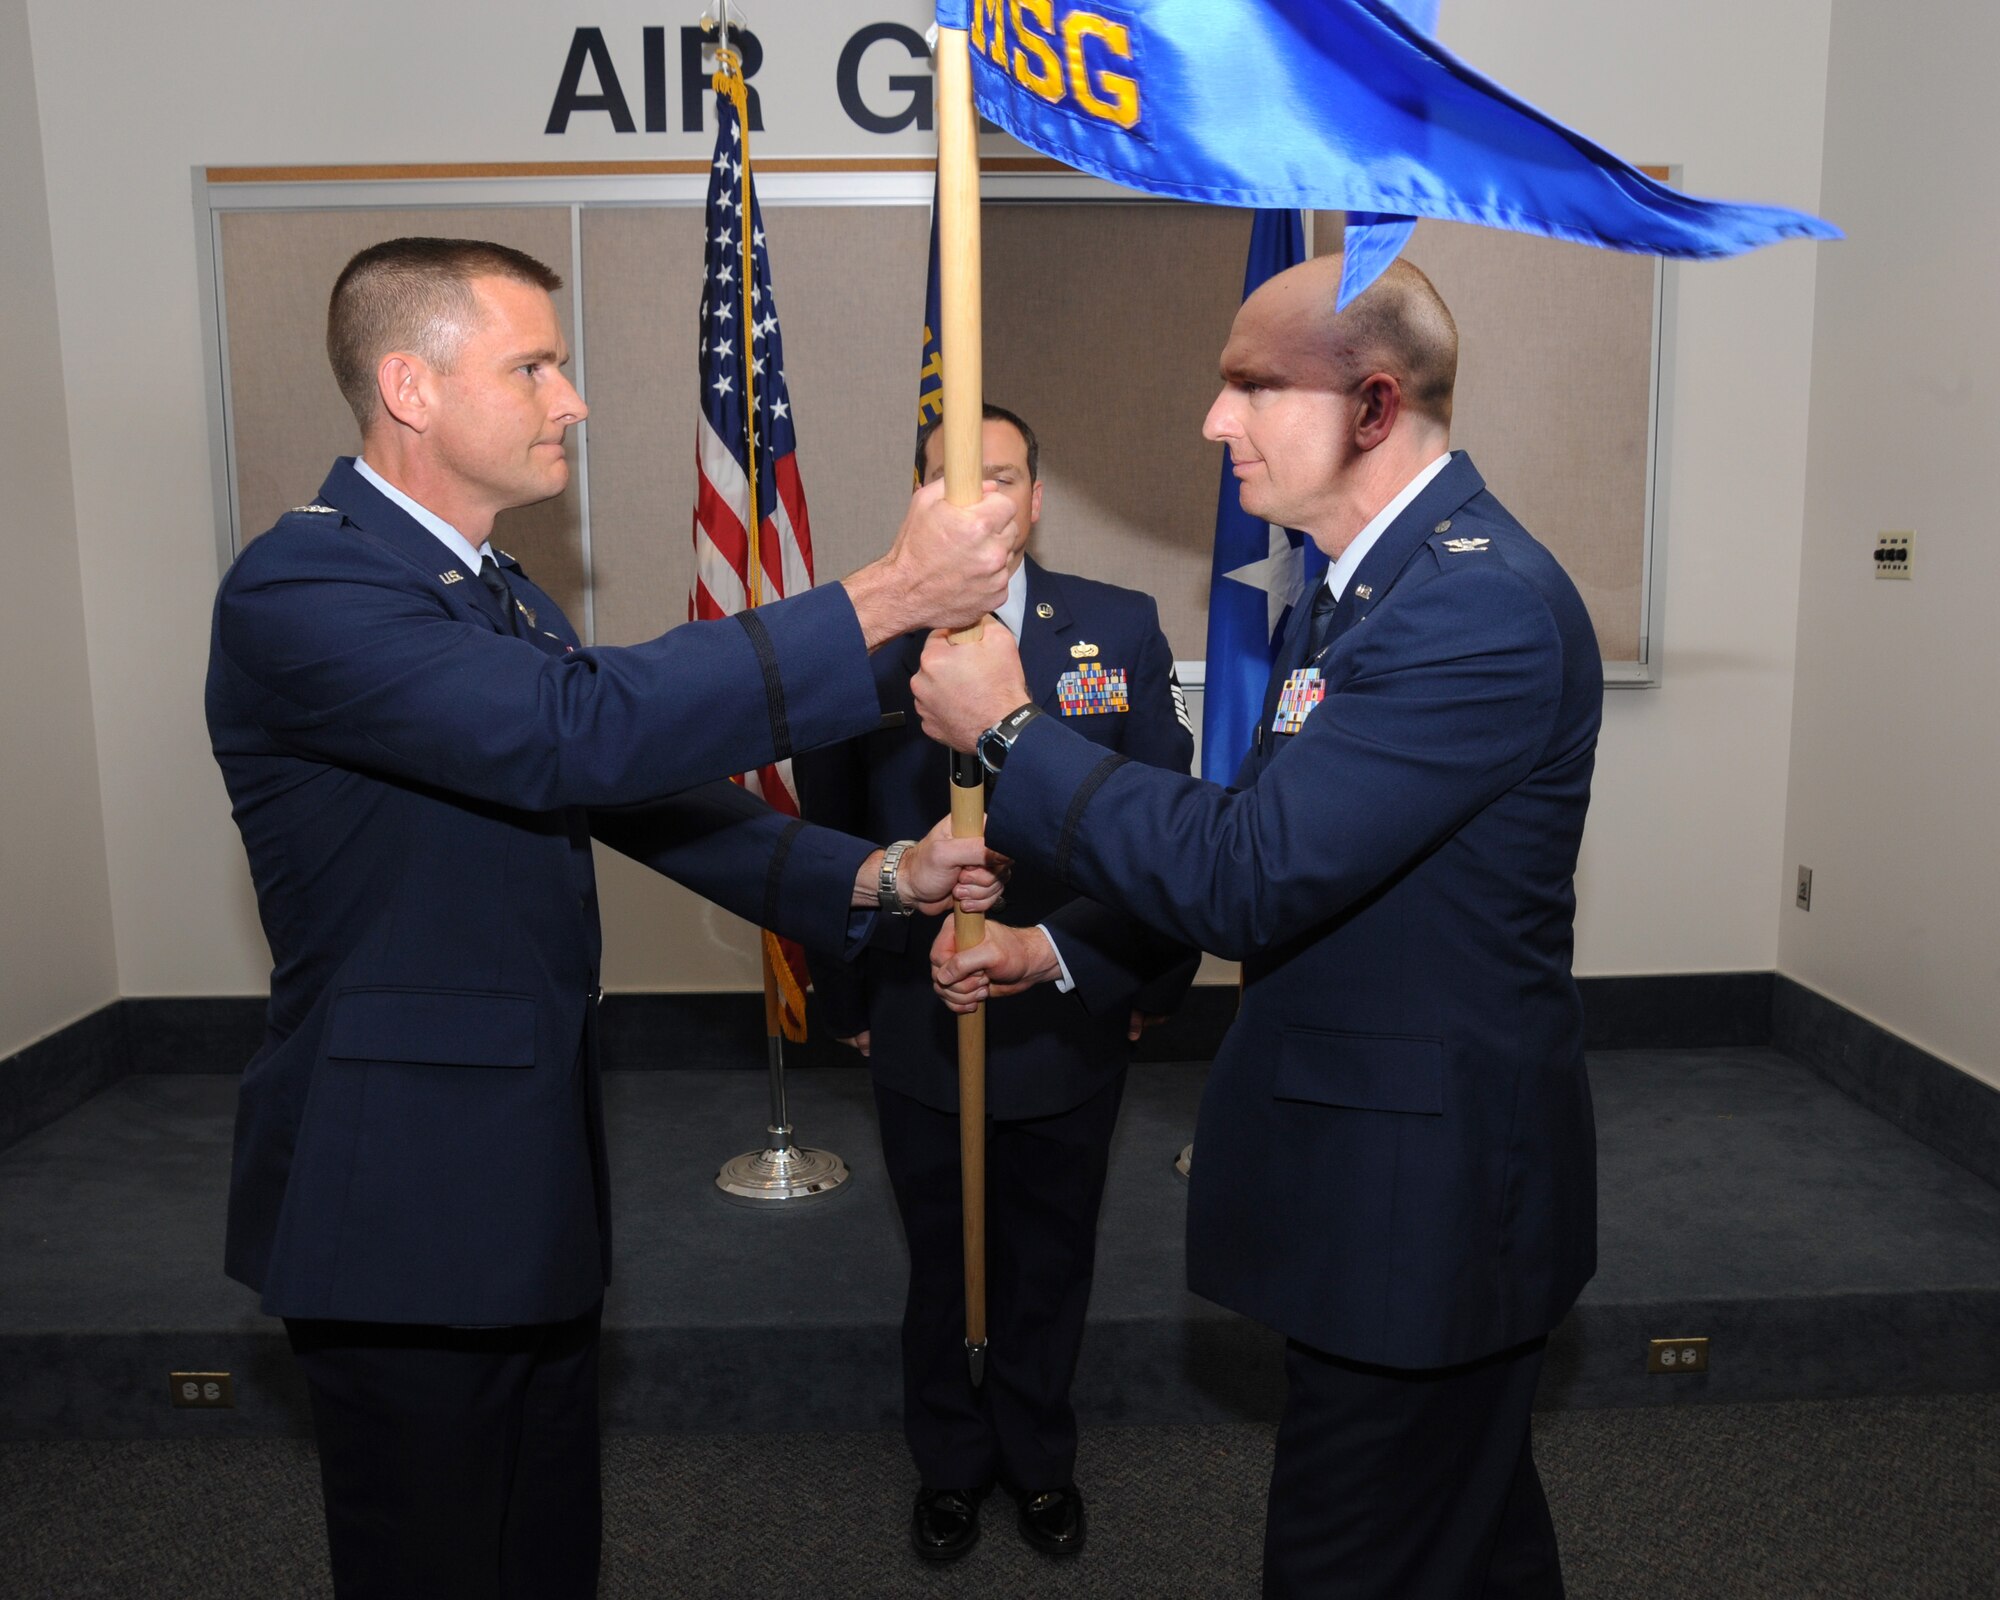 Col. Rick Wedan, 142nd Fighter Wing Commander, left, exchanges the colors with outgoing 142nd MSG Commander Col. Paul Fitzgerald, right, during the Mission Support Group Change of Command Ceremony, Portland Air National Guard Base, Ore., Aug. 3, 2014. (U.S. Air National Guard photo by Tech. Sgt. John Hughel, 142nd Fighter Wing Public Affairs/Released)